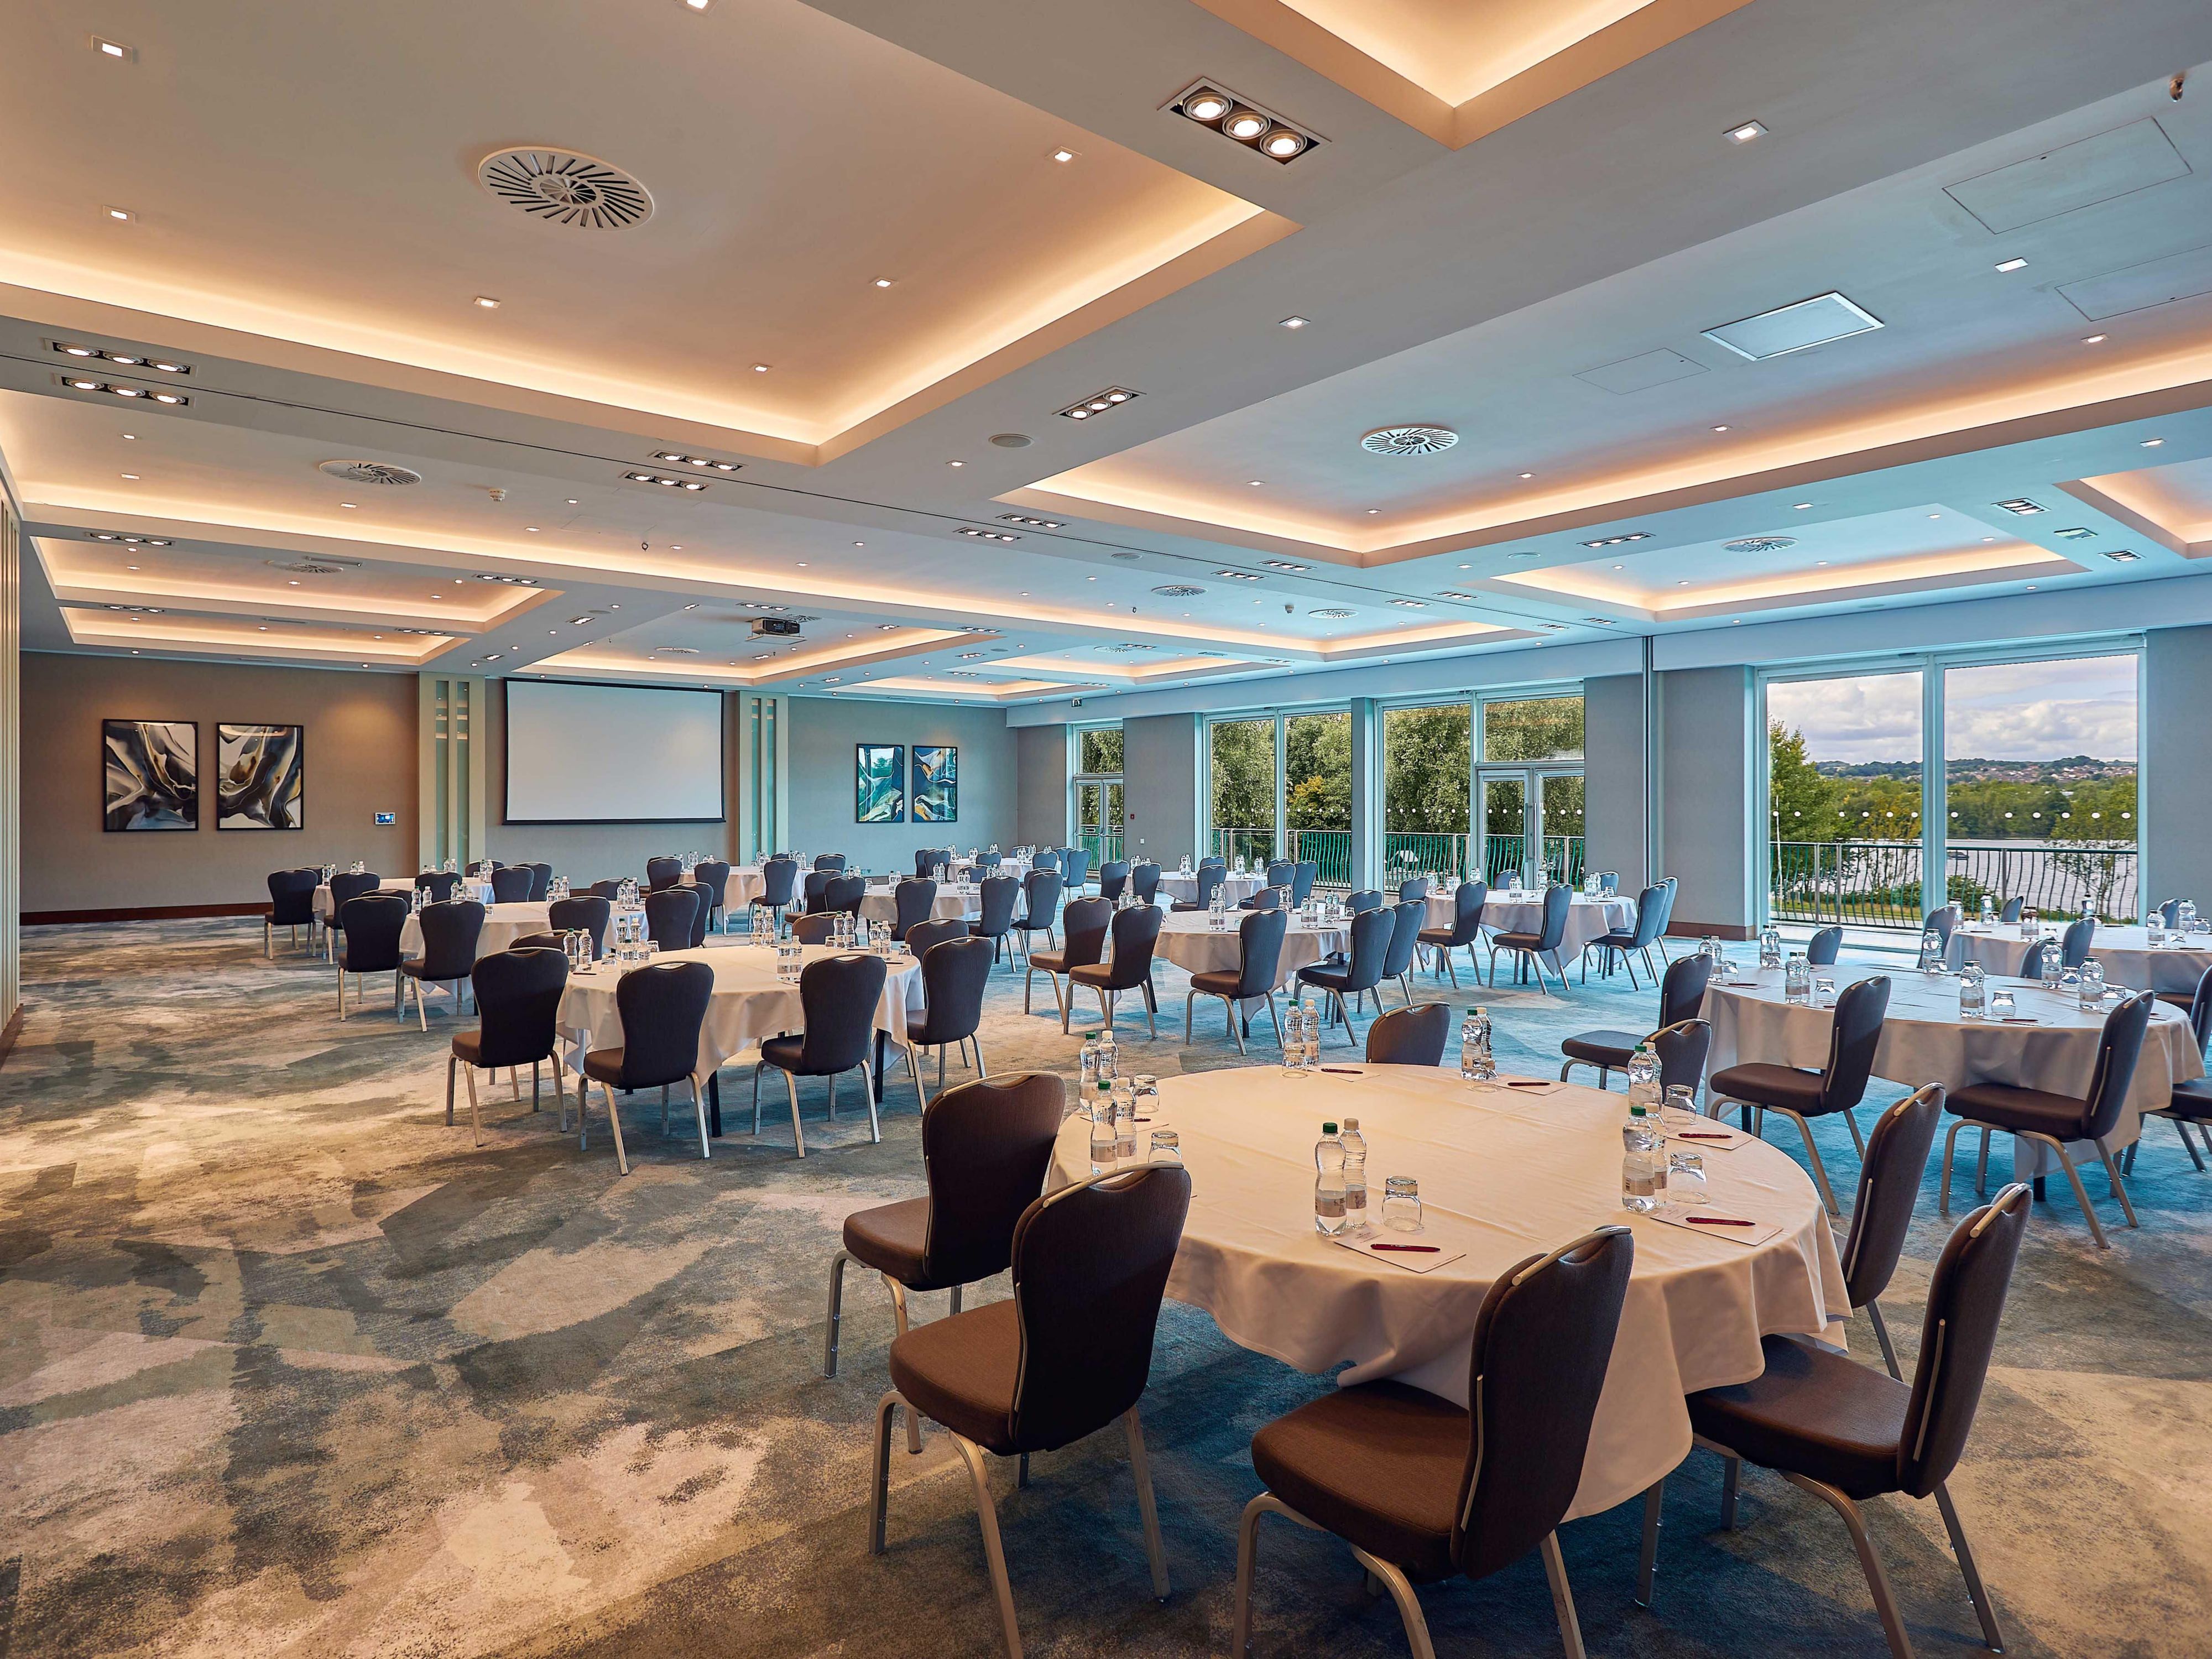 Crowne Plaza Marlow offers unique facilities ideal for corporate entertaining, meetings for up to 450 delegates and team building. Our purpose built conference suite incorporates eight highly modern meeting rooms with exclusive break out areas.